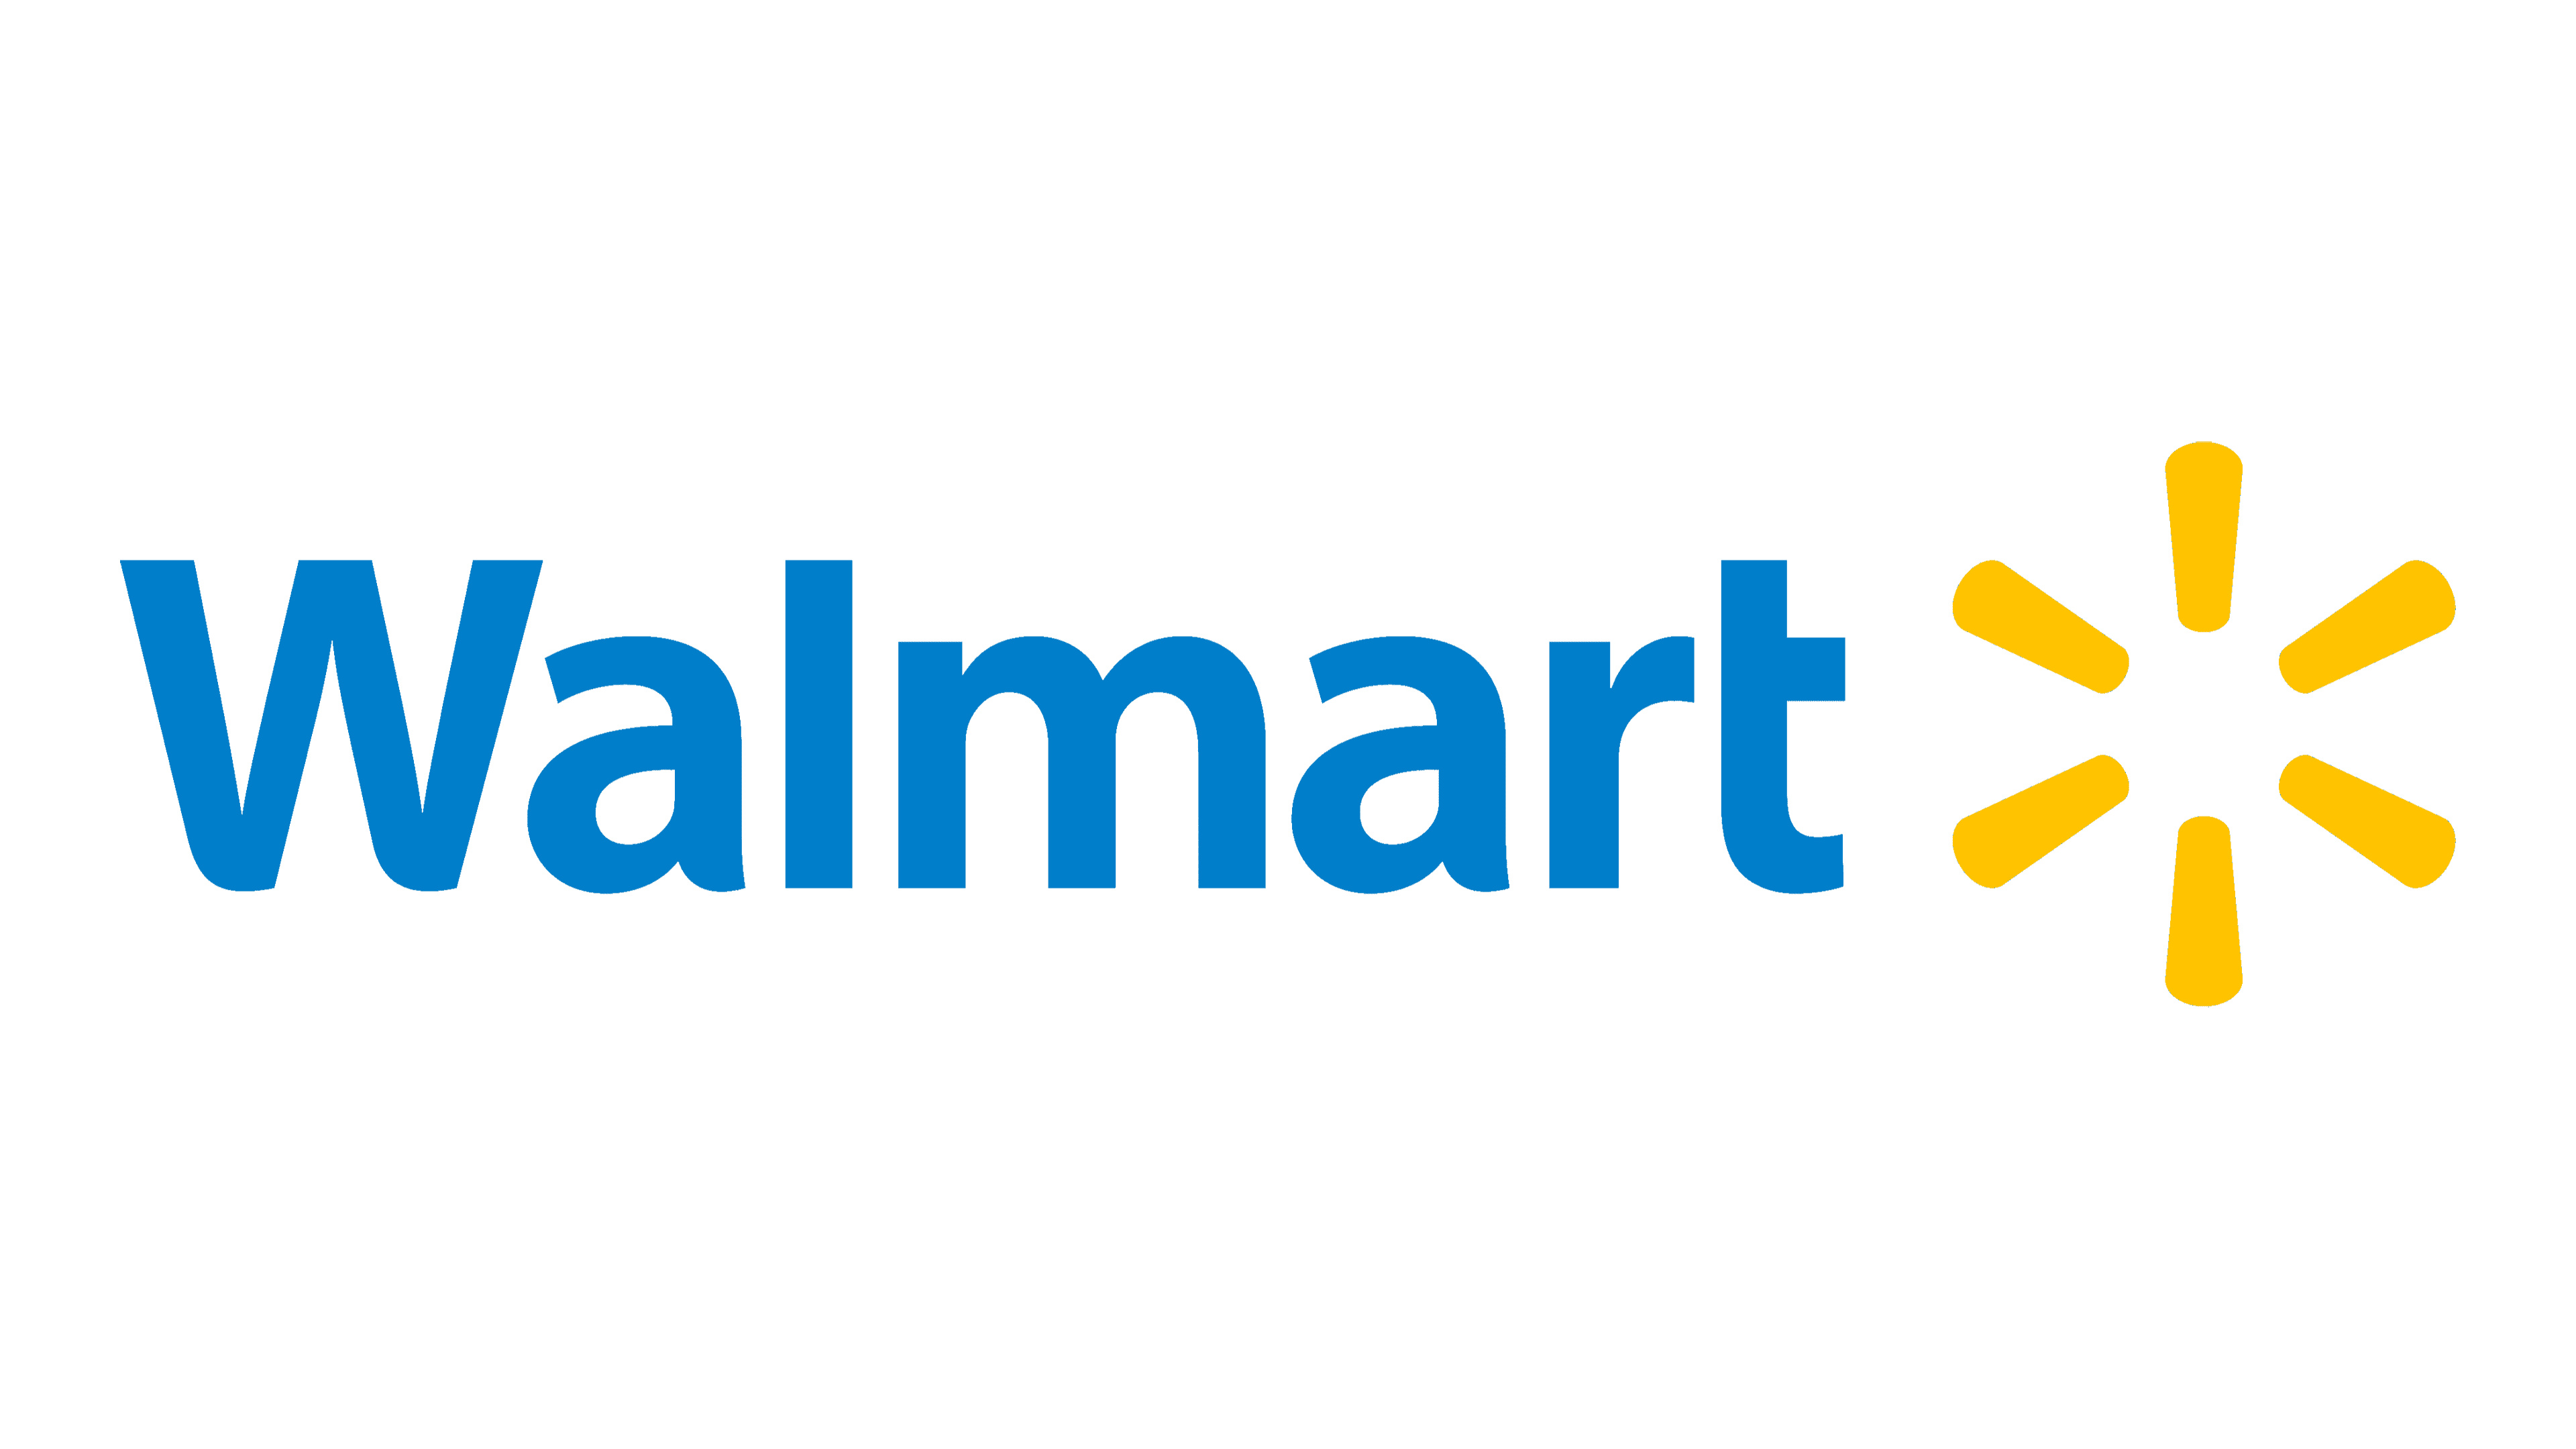 Walmart: The king of retail, An American multinational corporation. 3840x2160 4K Background.